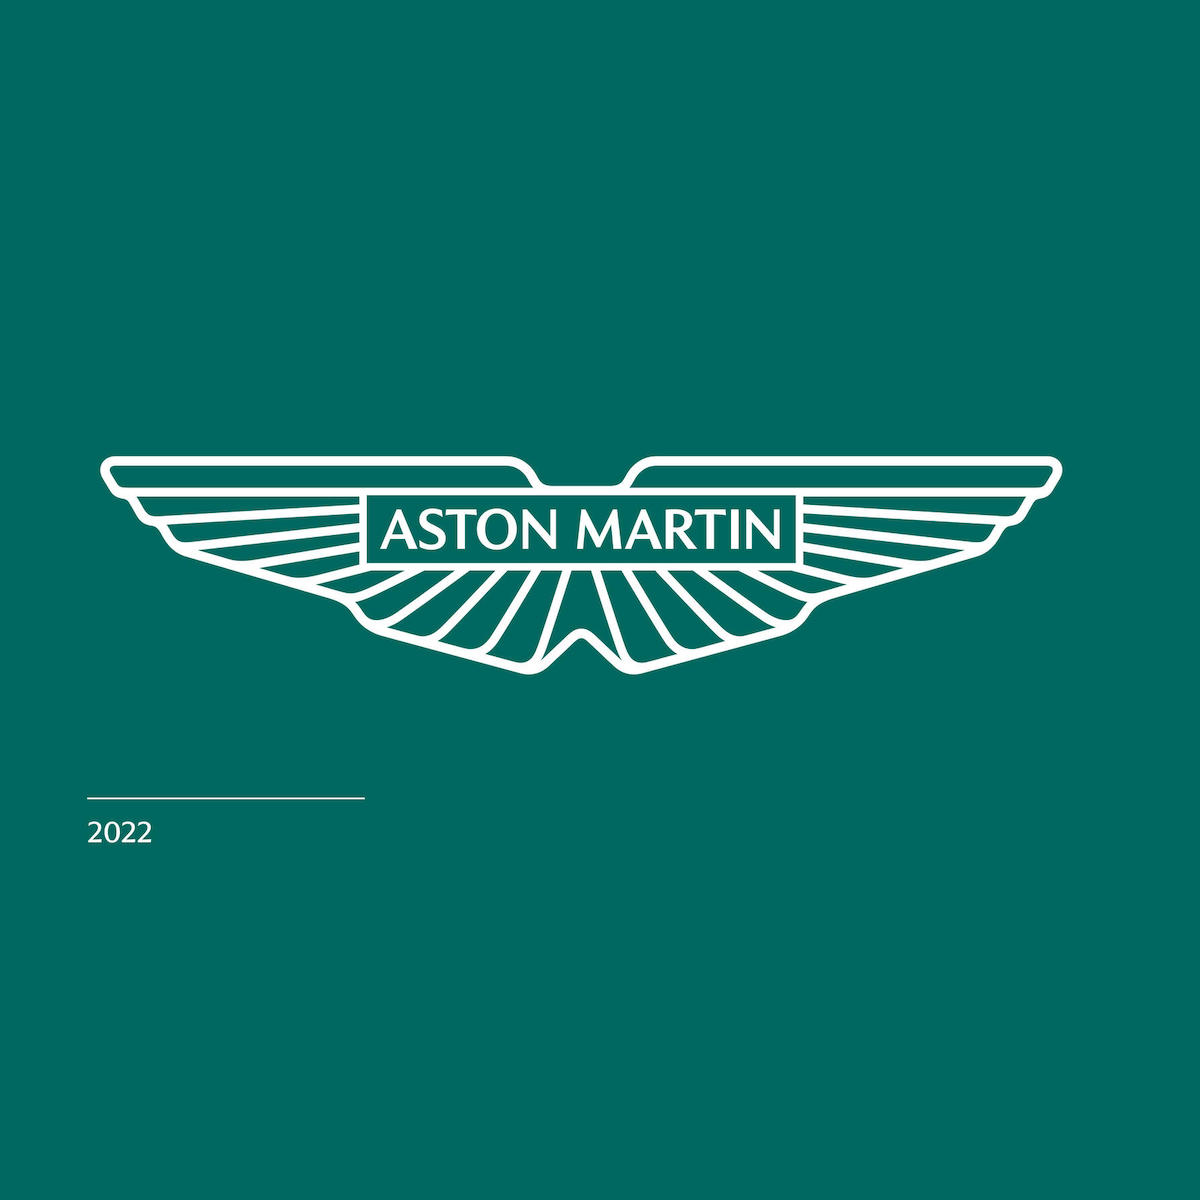 The 2022 version of the Aston Martin wings logo